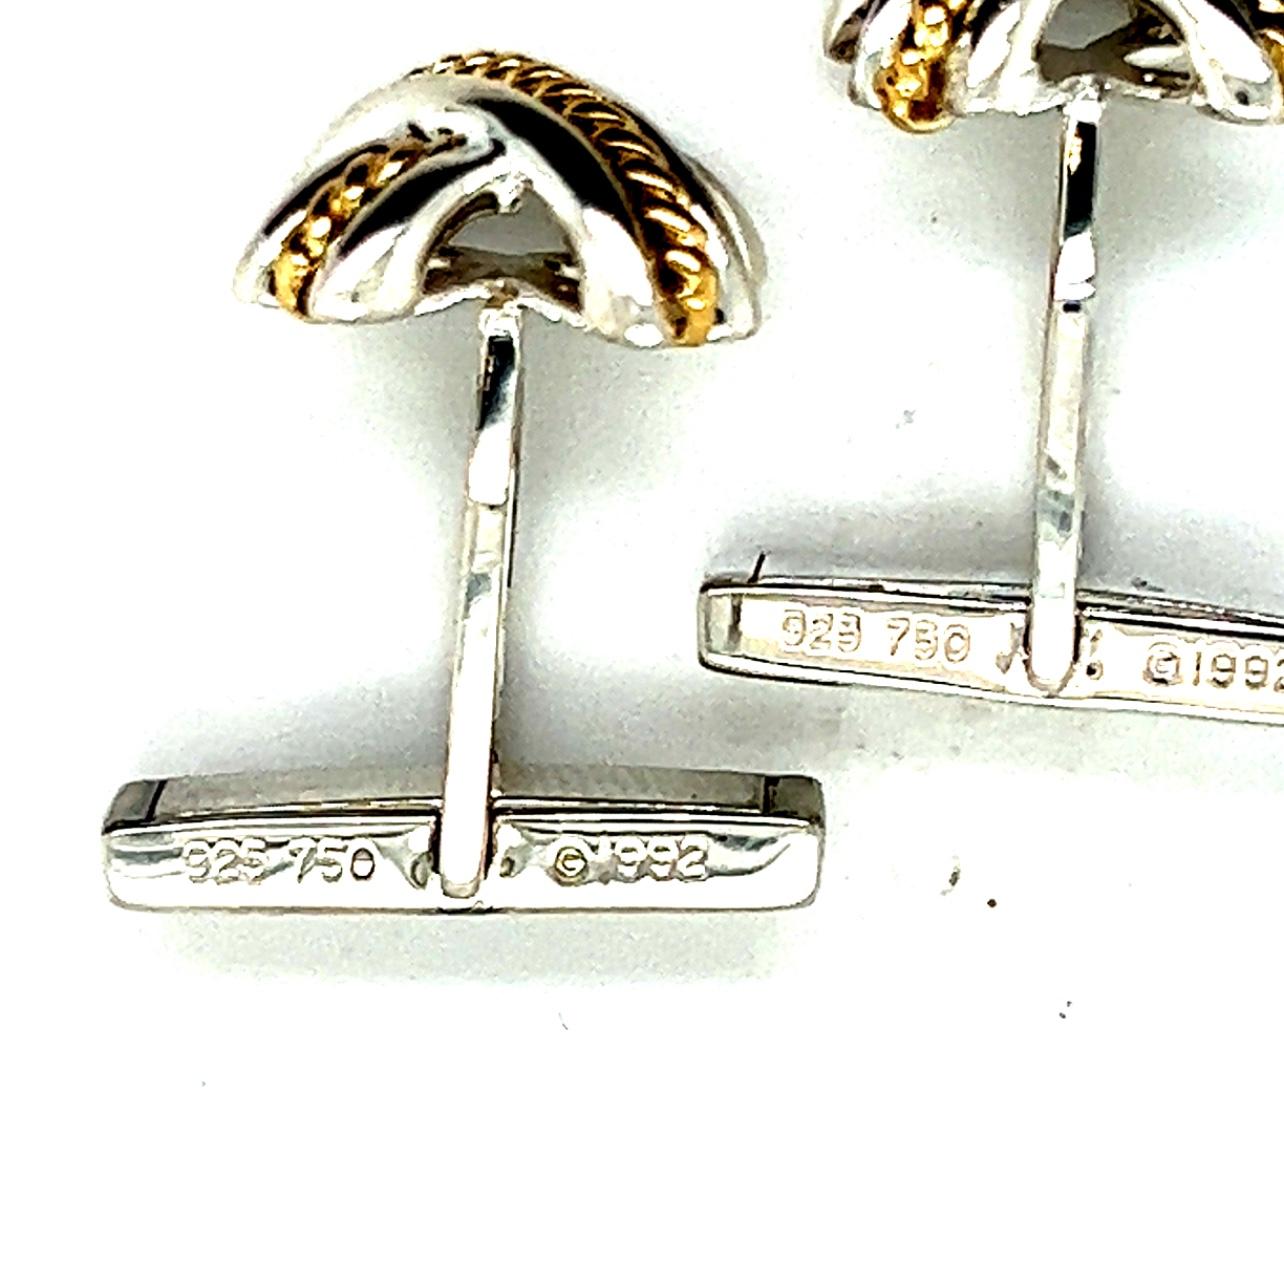 tiffany and co mens earrings